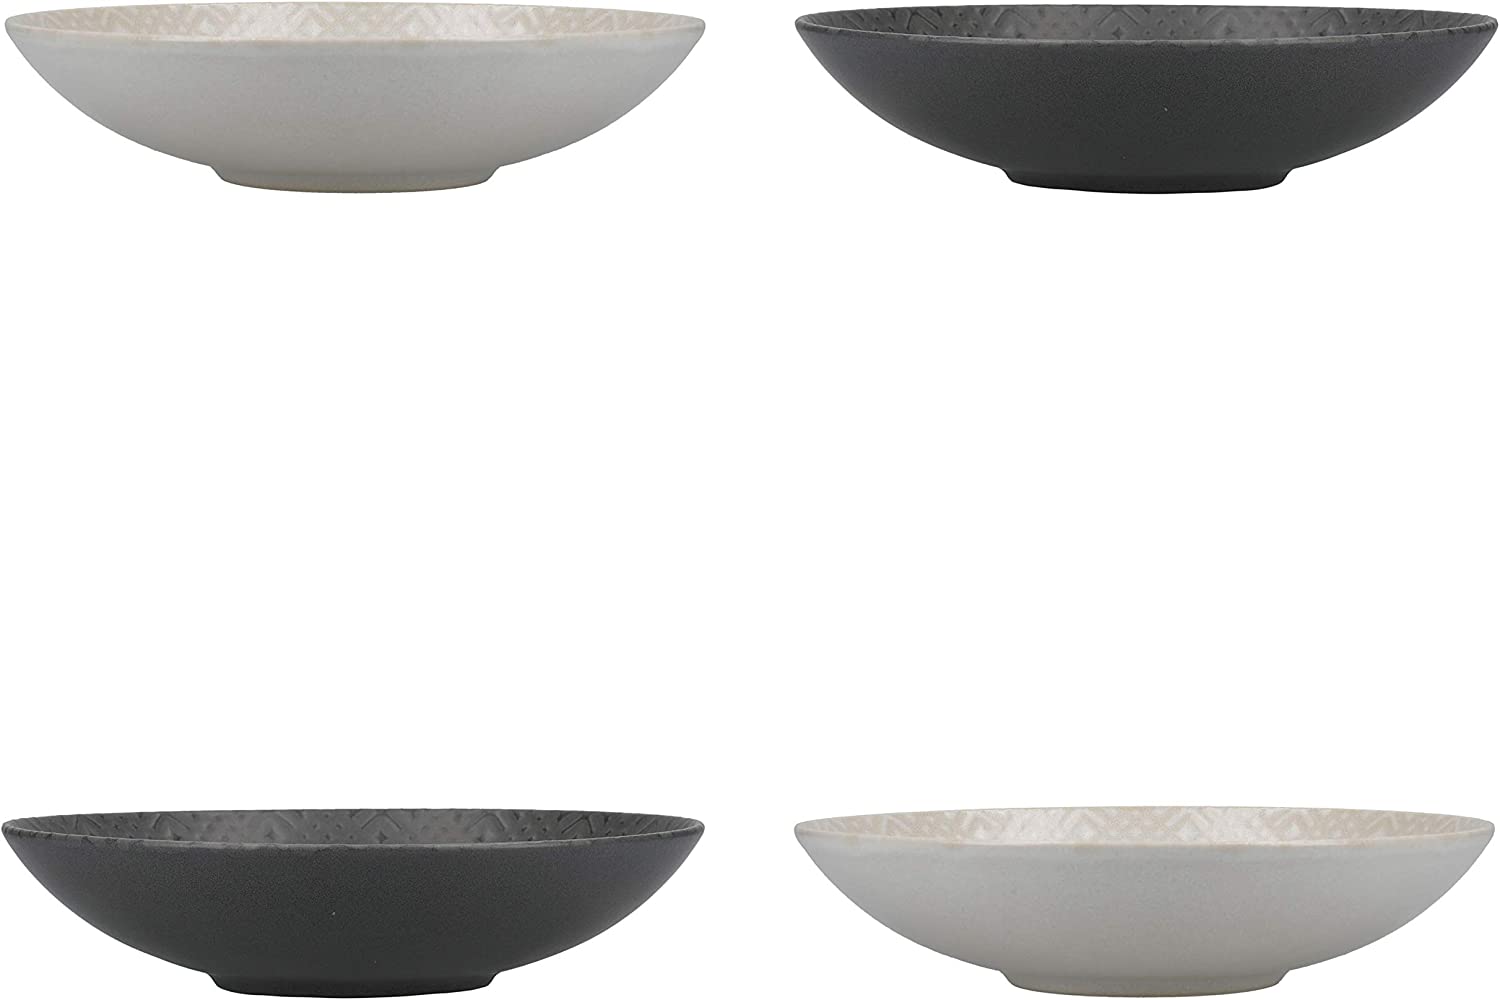 KC BLUE KitchenCraft Pasta Bowls Set of 4 in Gift Box, Ideal for Ramen and Rice, Lead-Free Glazed Stoneware, Embossed Grey/Black, 22 cm